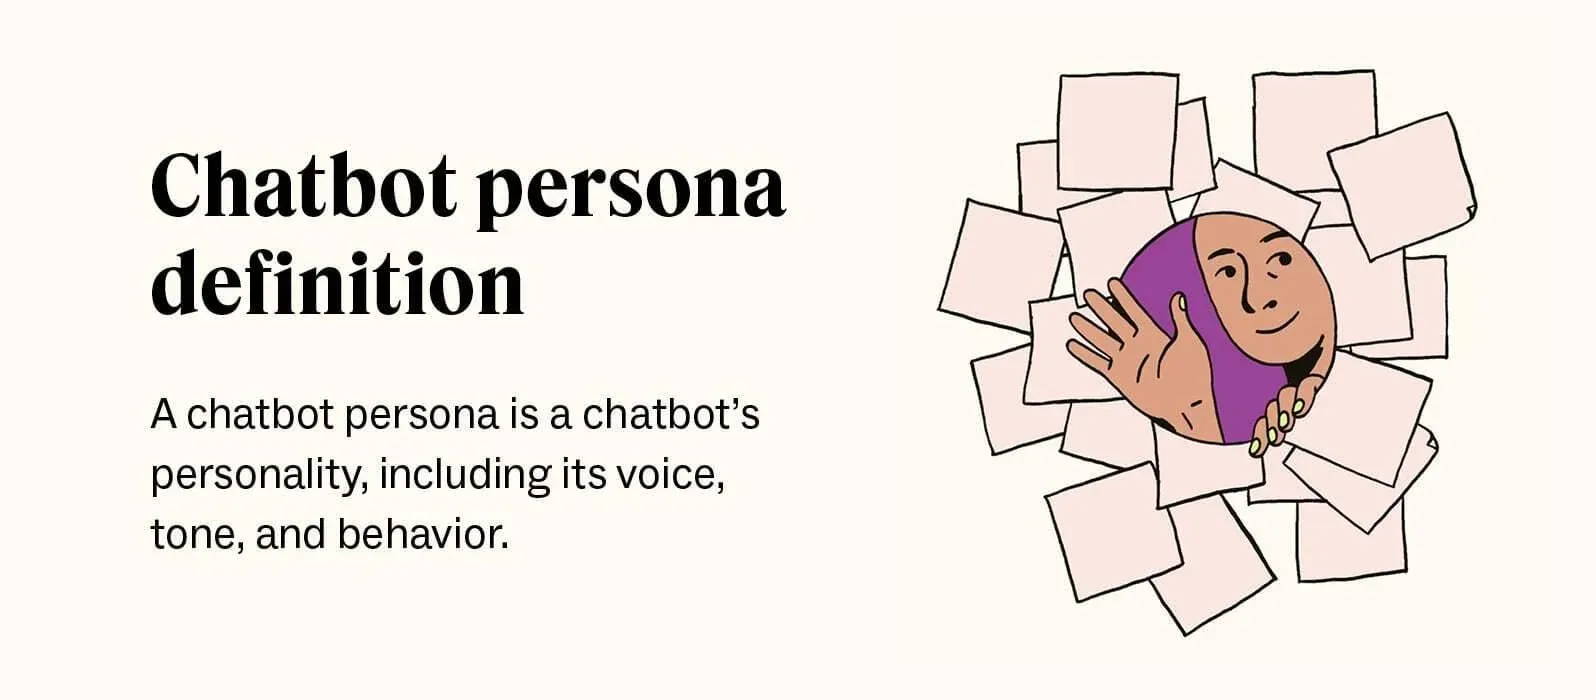 what is a chatbot persona